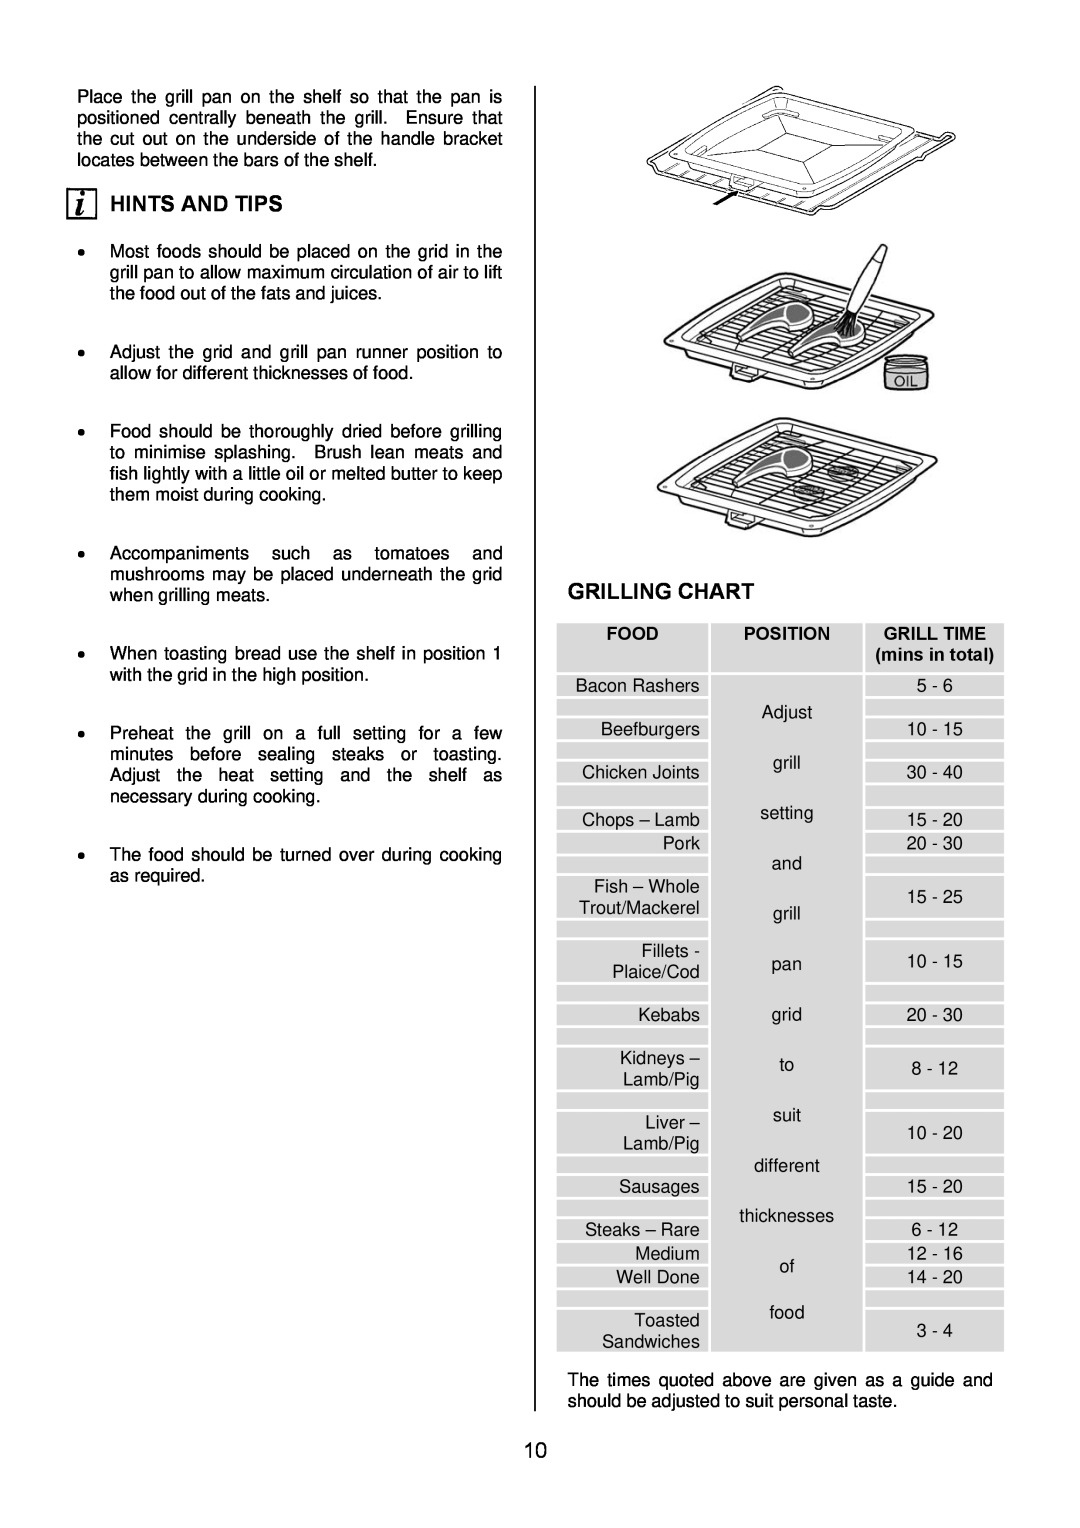 Electrolux EKG5543, EKG5542 manual Hints And Tips, Food, Position, GRILL TIME mins in total 